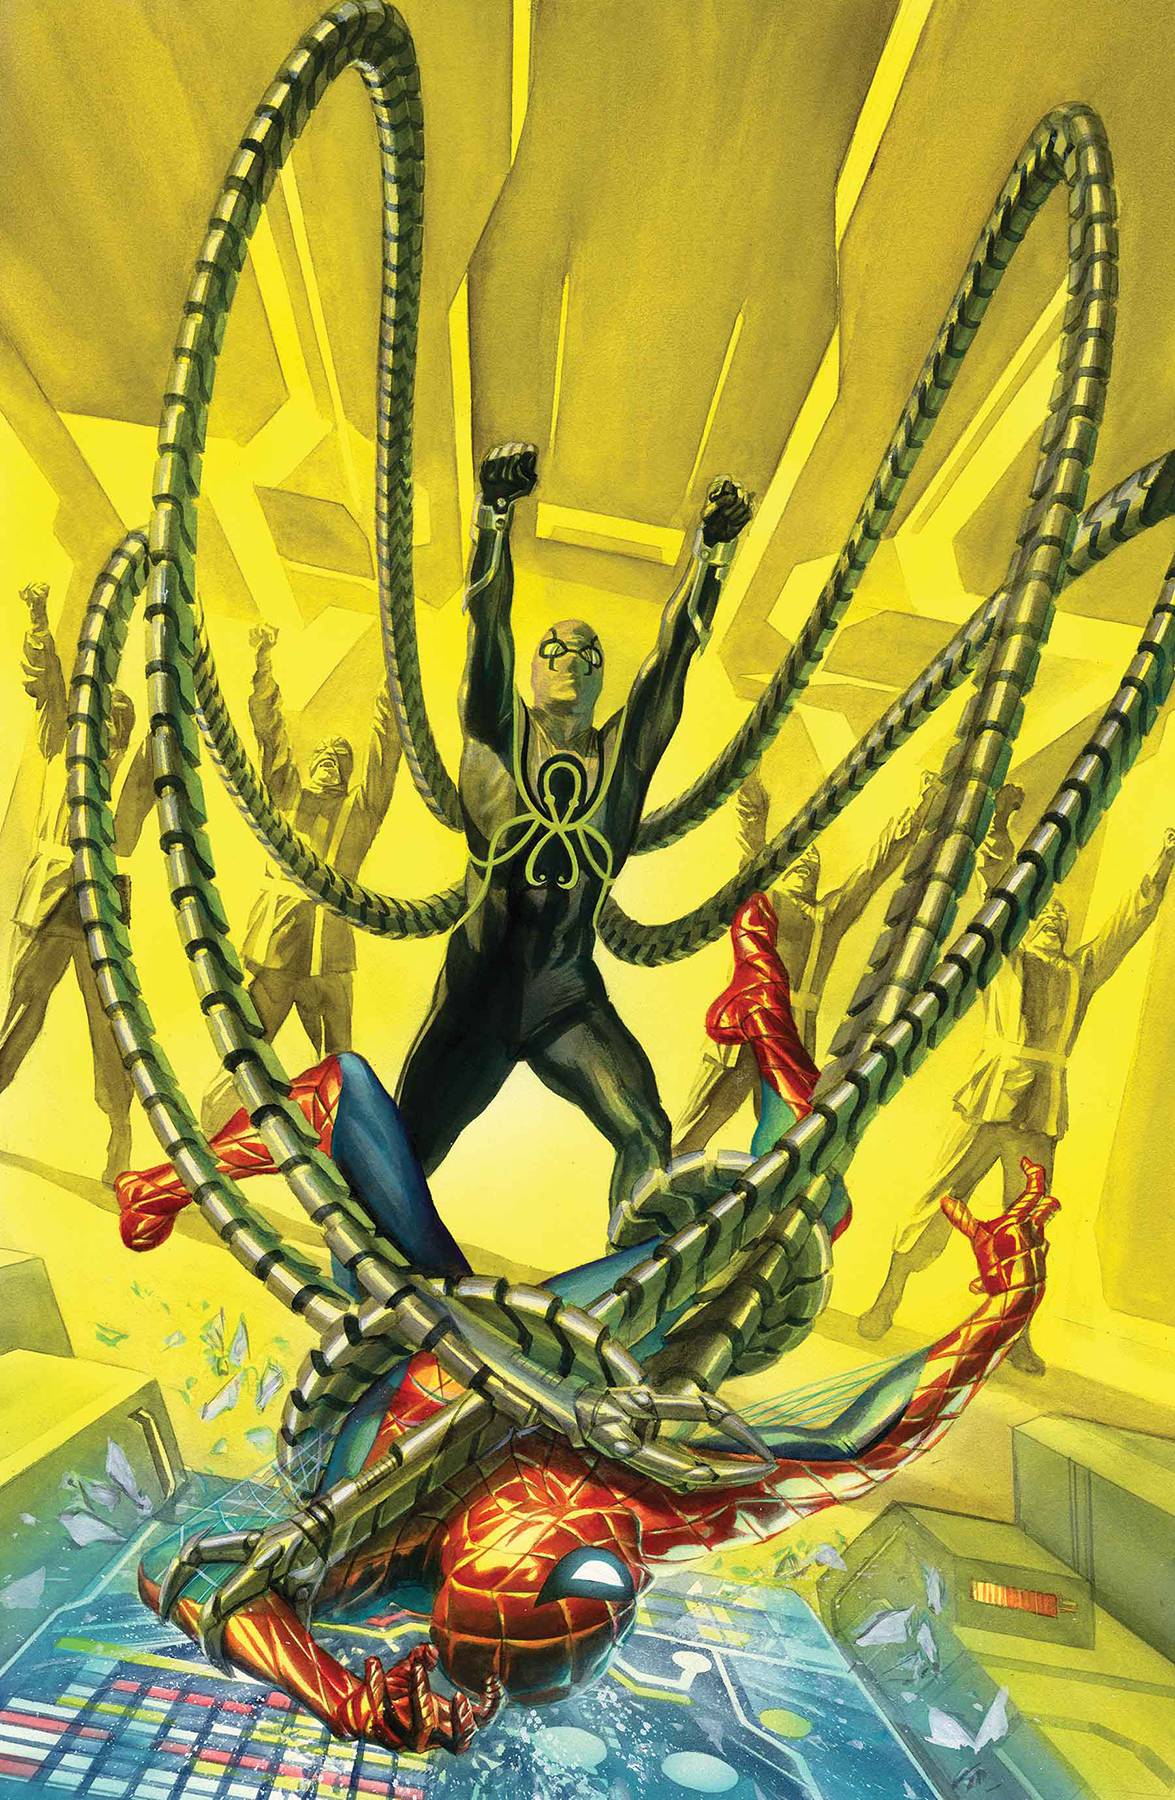 AMAZING SPIDER-MAN #29 BY ALEX ROSS POSTER